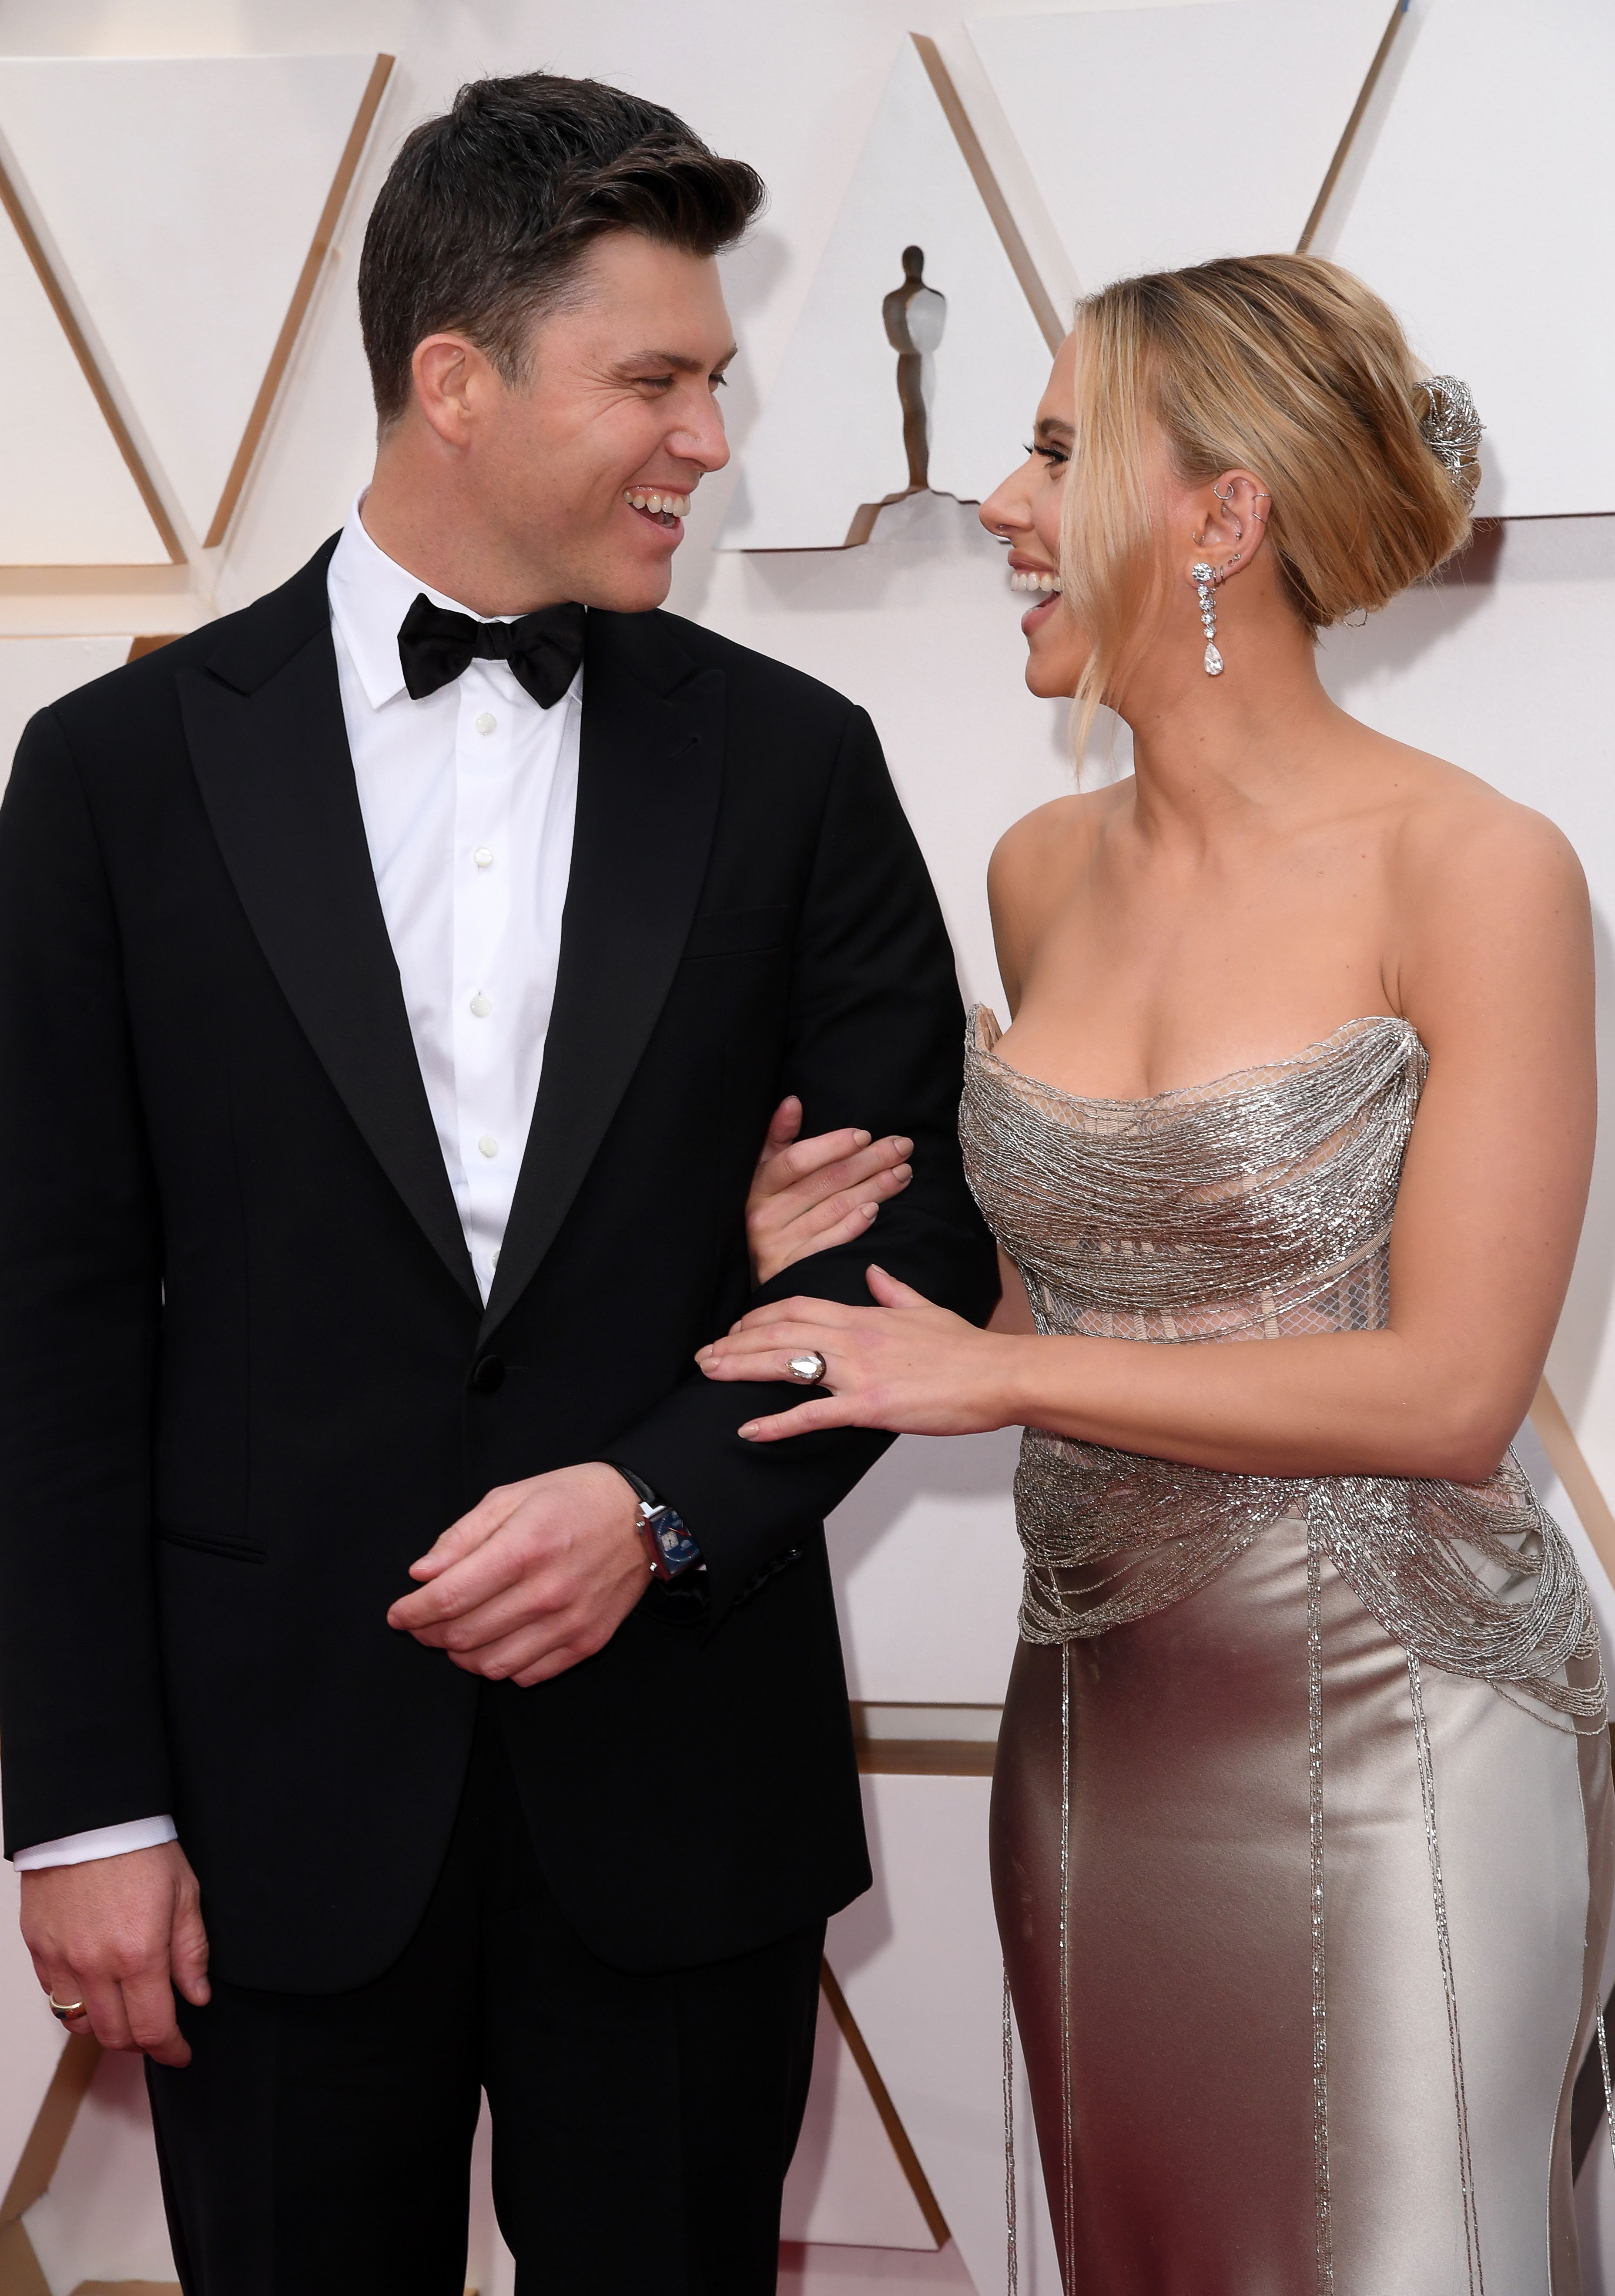 Scarlett Johansson And Colin Jost Share Adorable Moment At Oscars